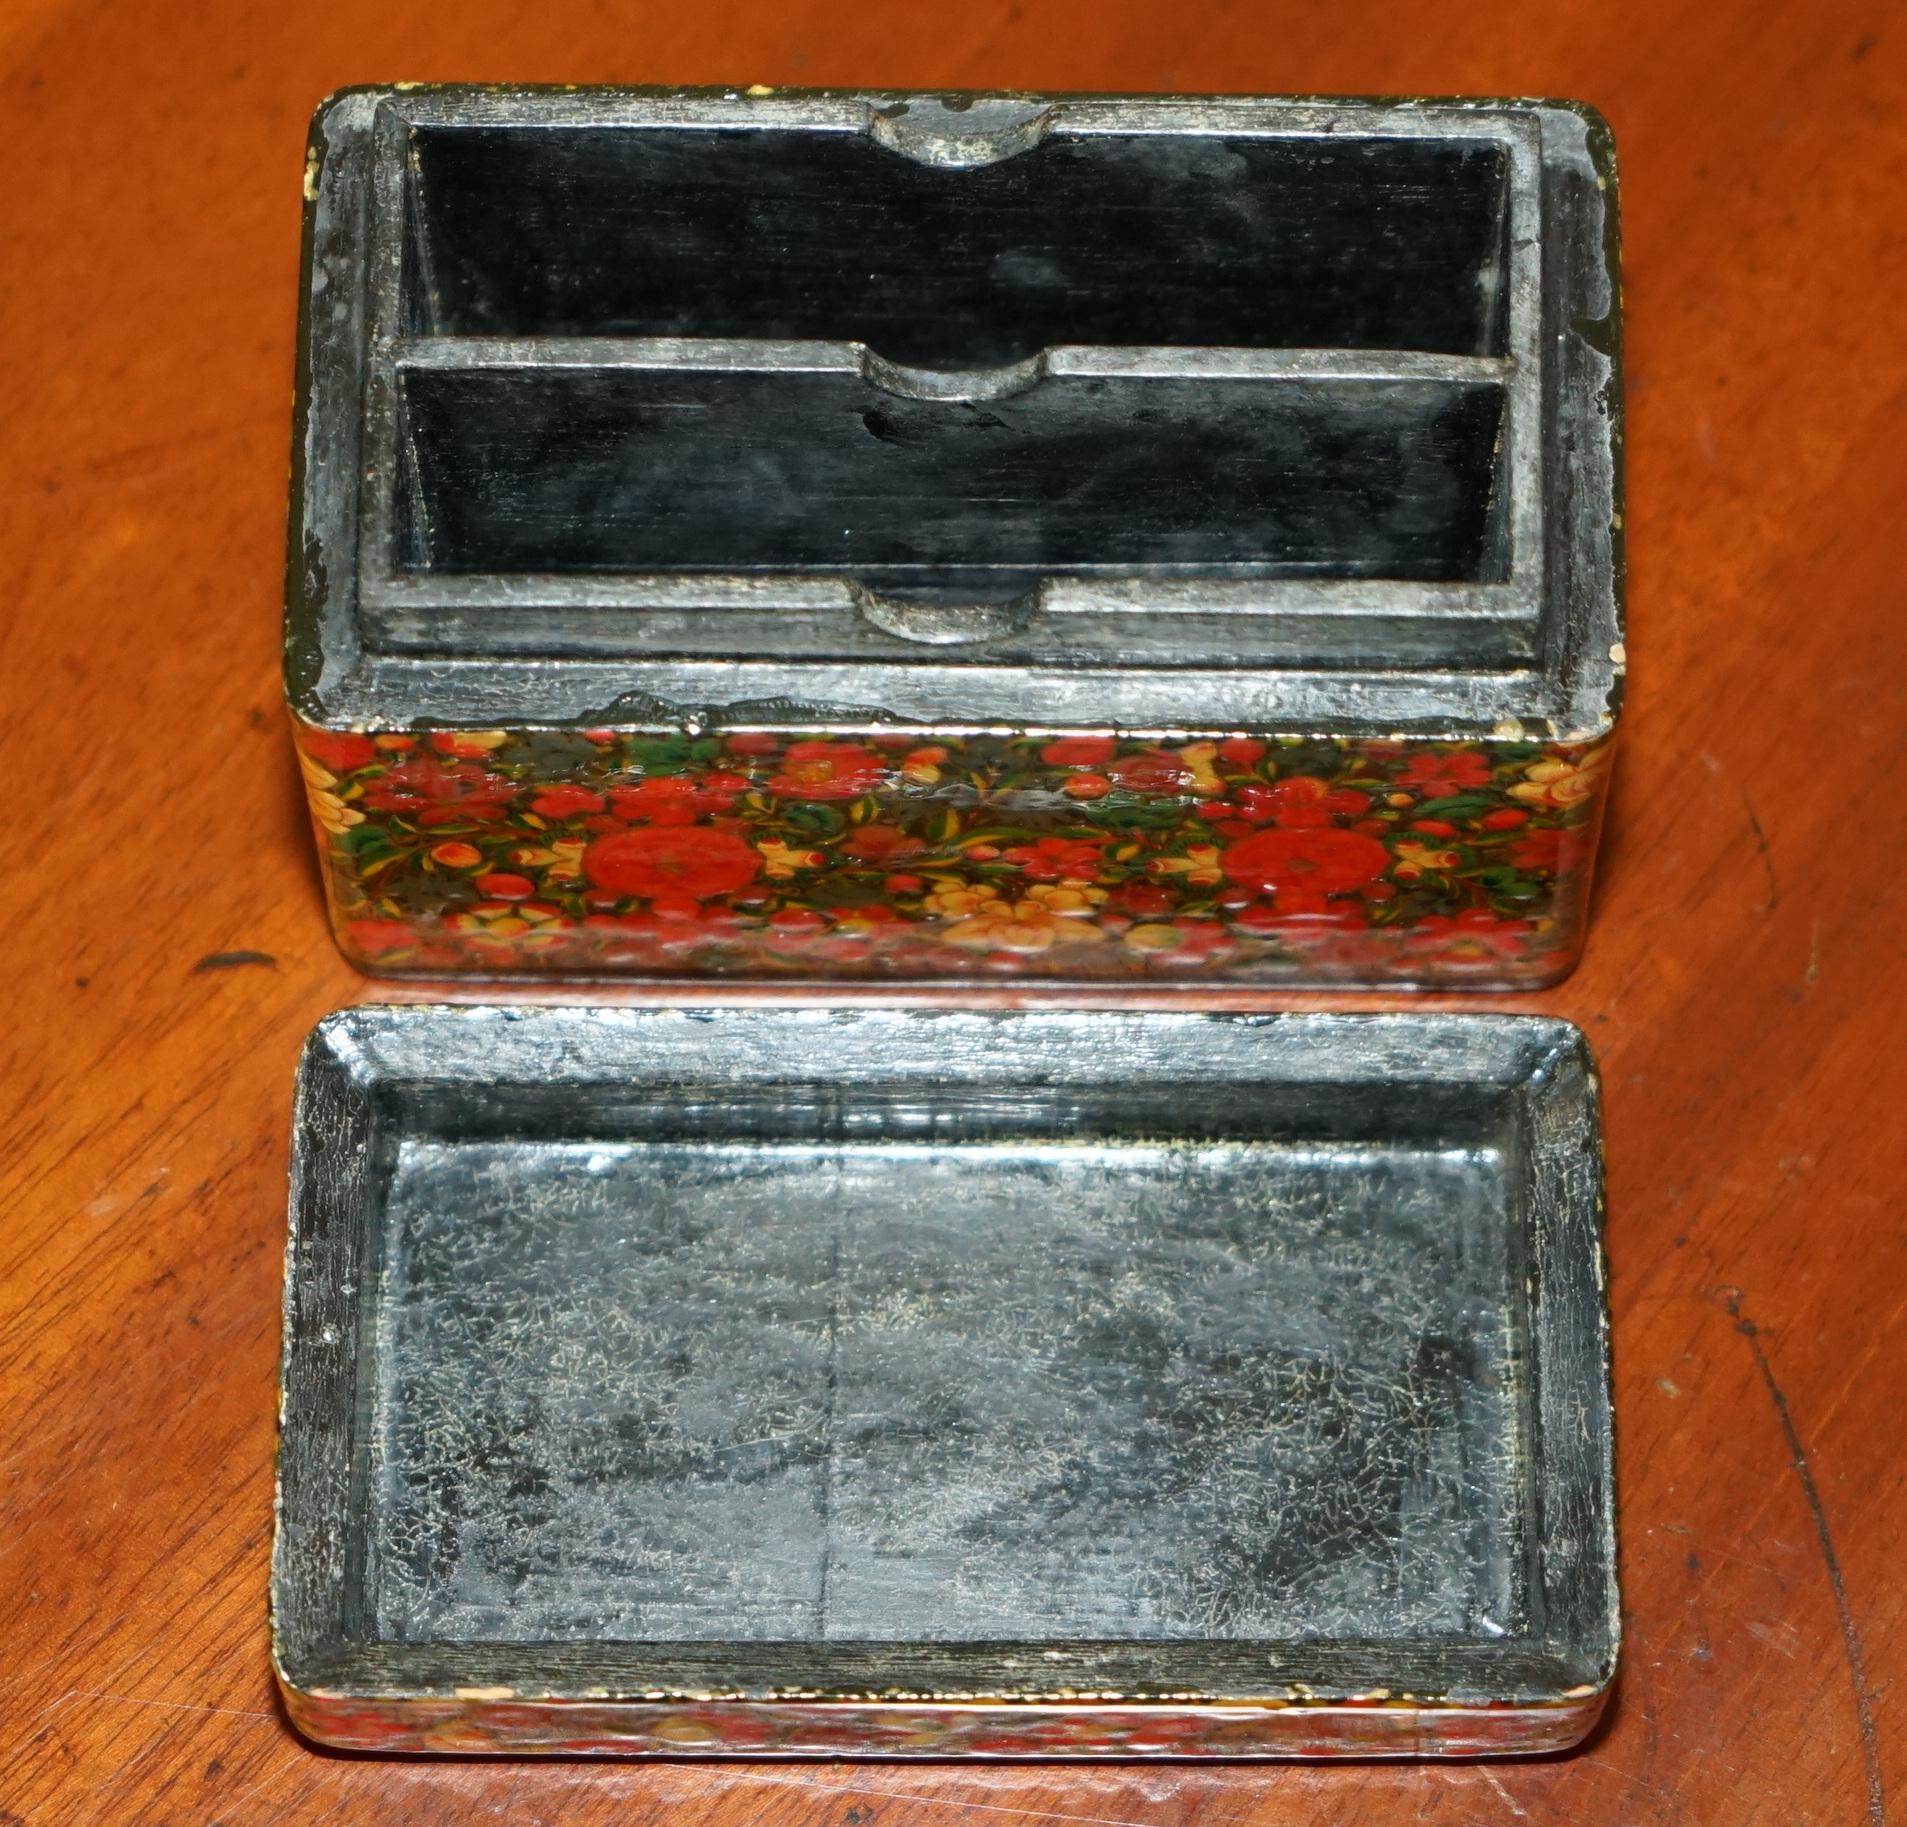 DECORATIVE ANTIQUE ORIGINAL KASHMIR PLAYiNG CARD BOX WITH TWIN COMPARTMENTS For Sale 4